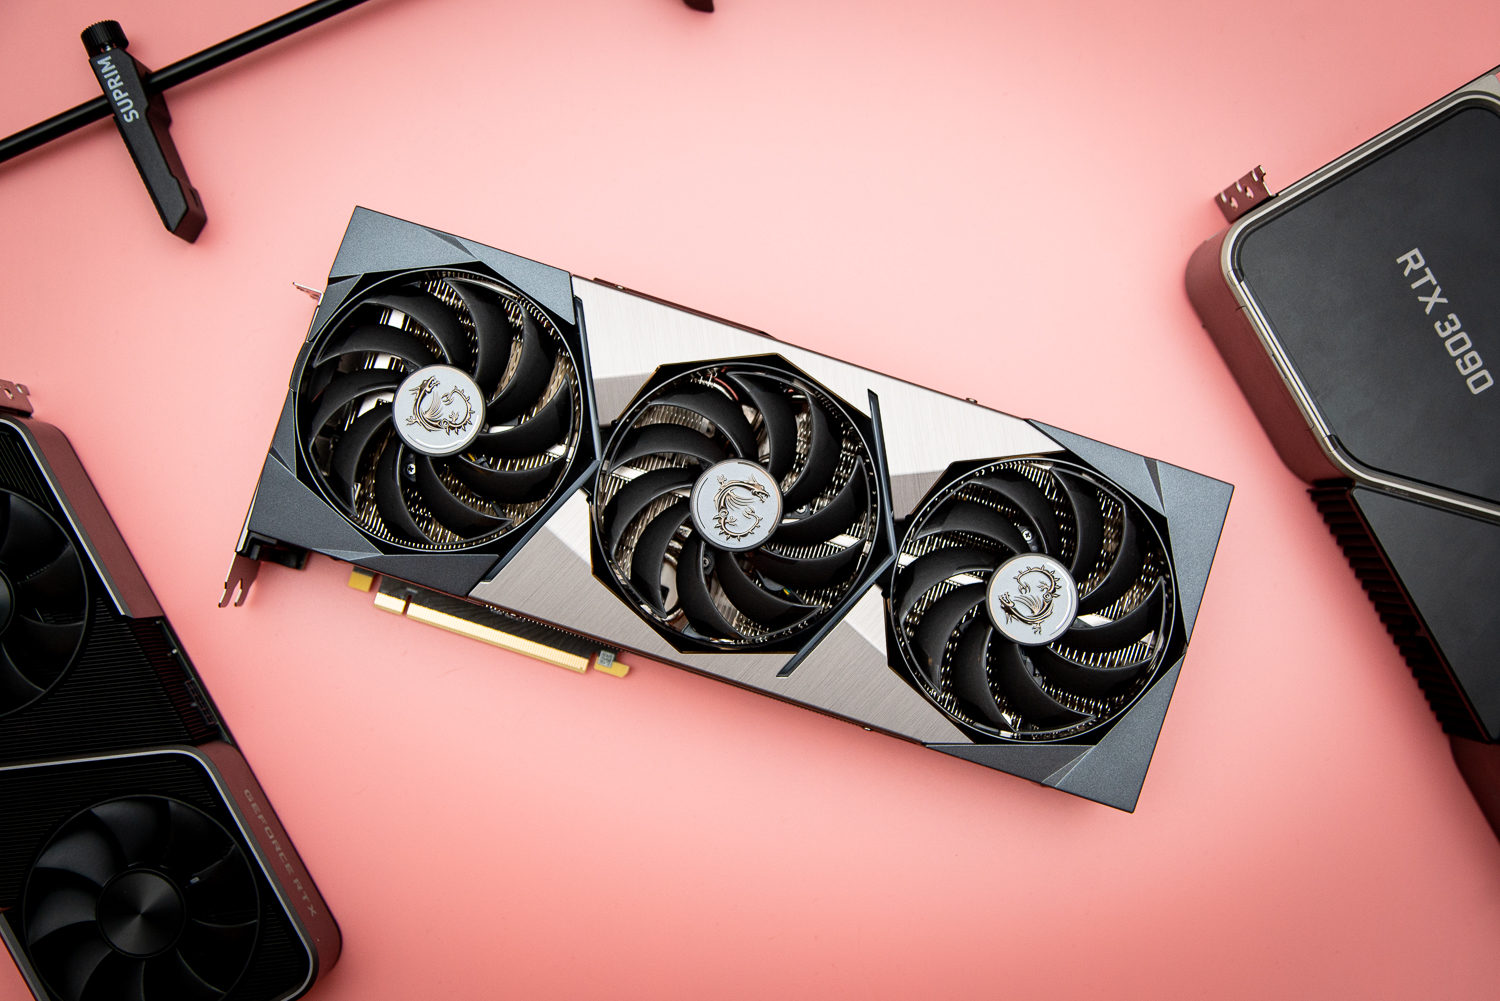 AMD Radeon RX 6800XT and GeForce RTX 3070 compared side by side